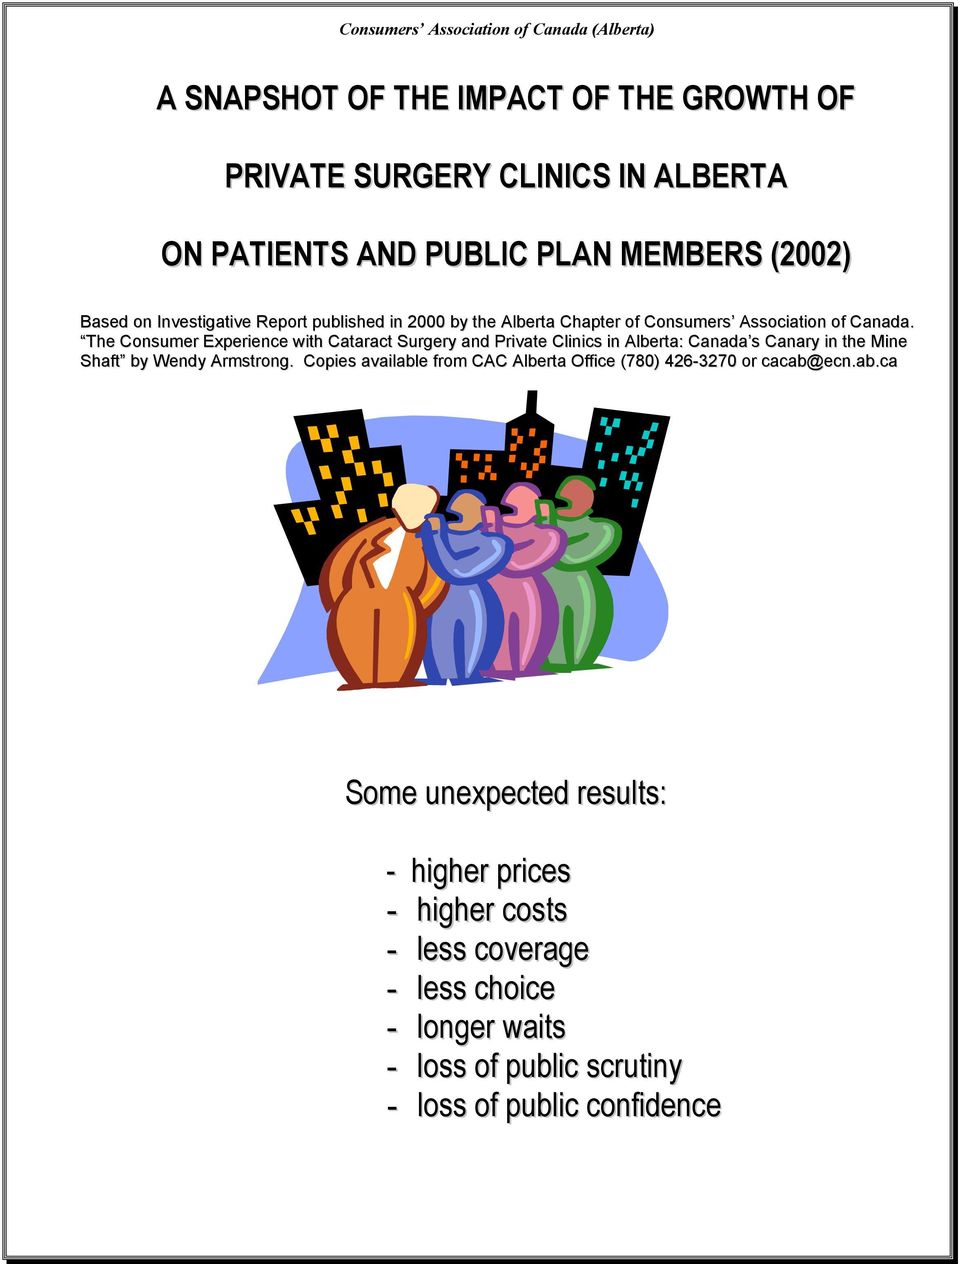 The Consumer Experience with Cataract Surgery and Private Clinics in Alberta: Canada s Canary in the Mine Shaft by Wendy Armstrong.